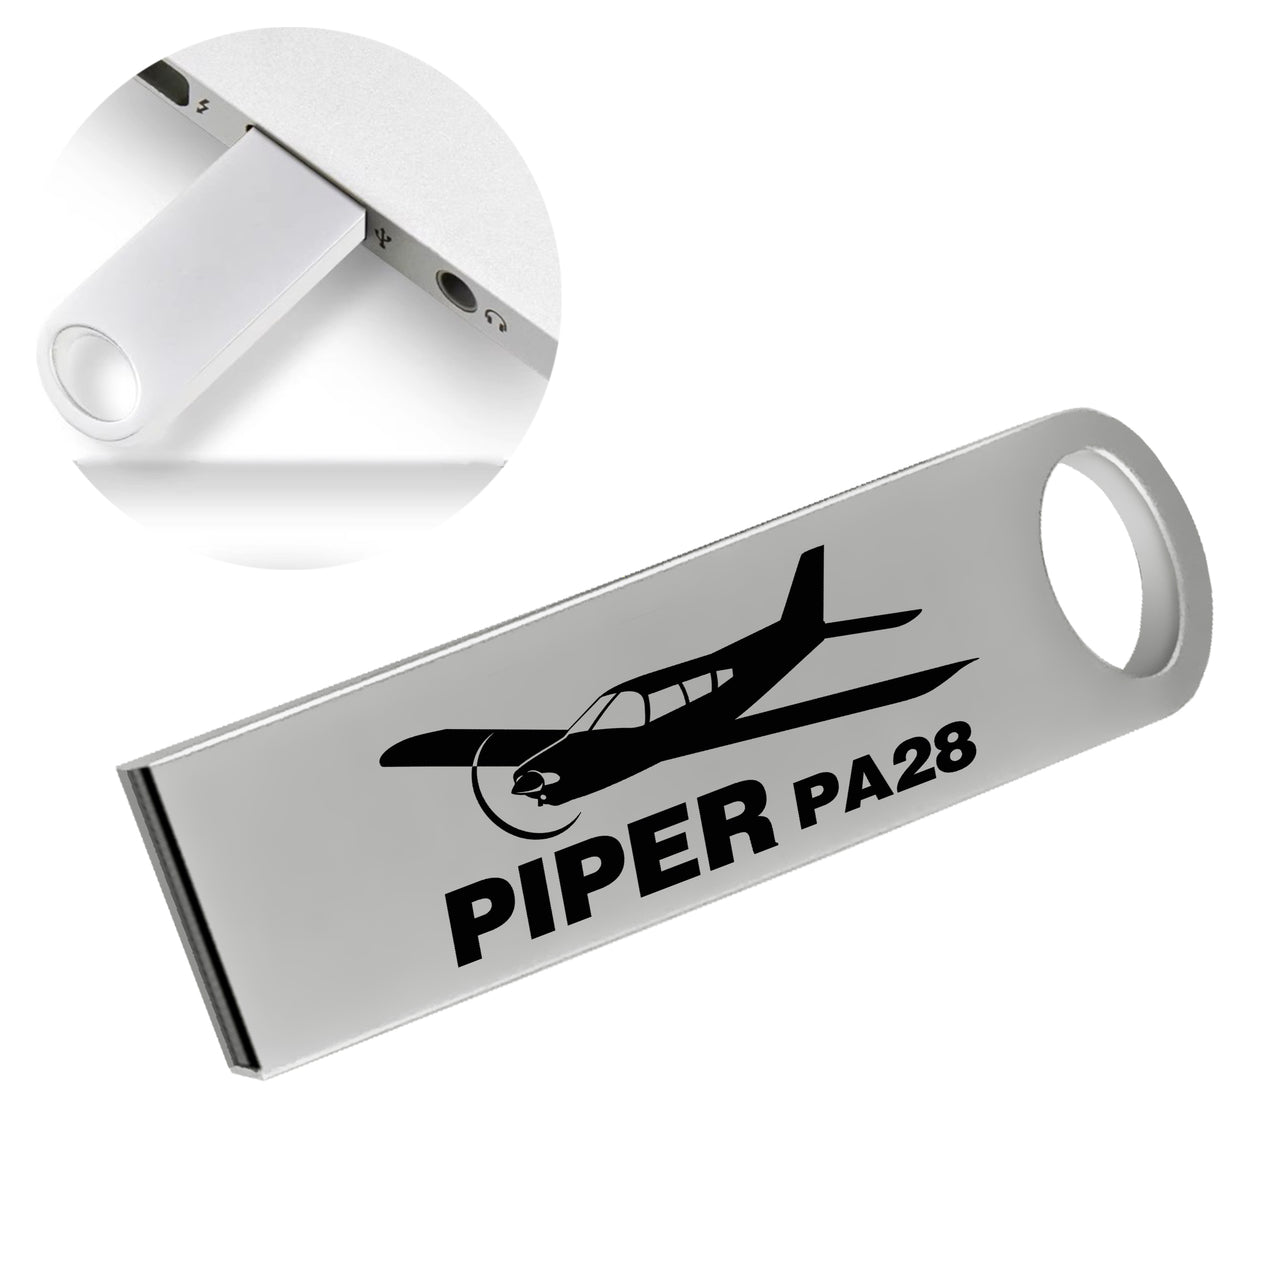 The Piper PA28 Designed Waterproof USB Devices